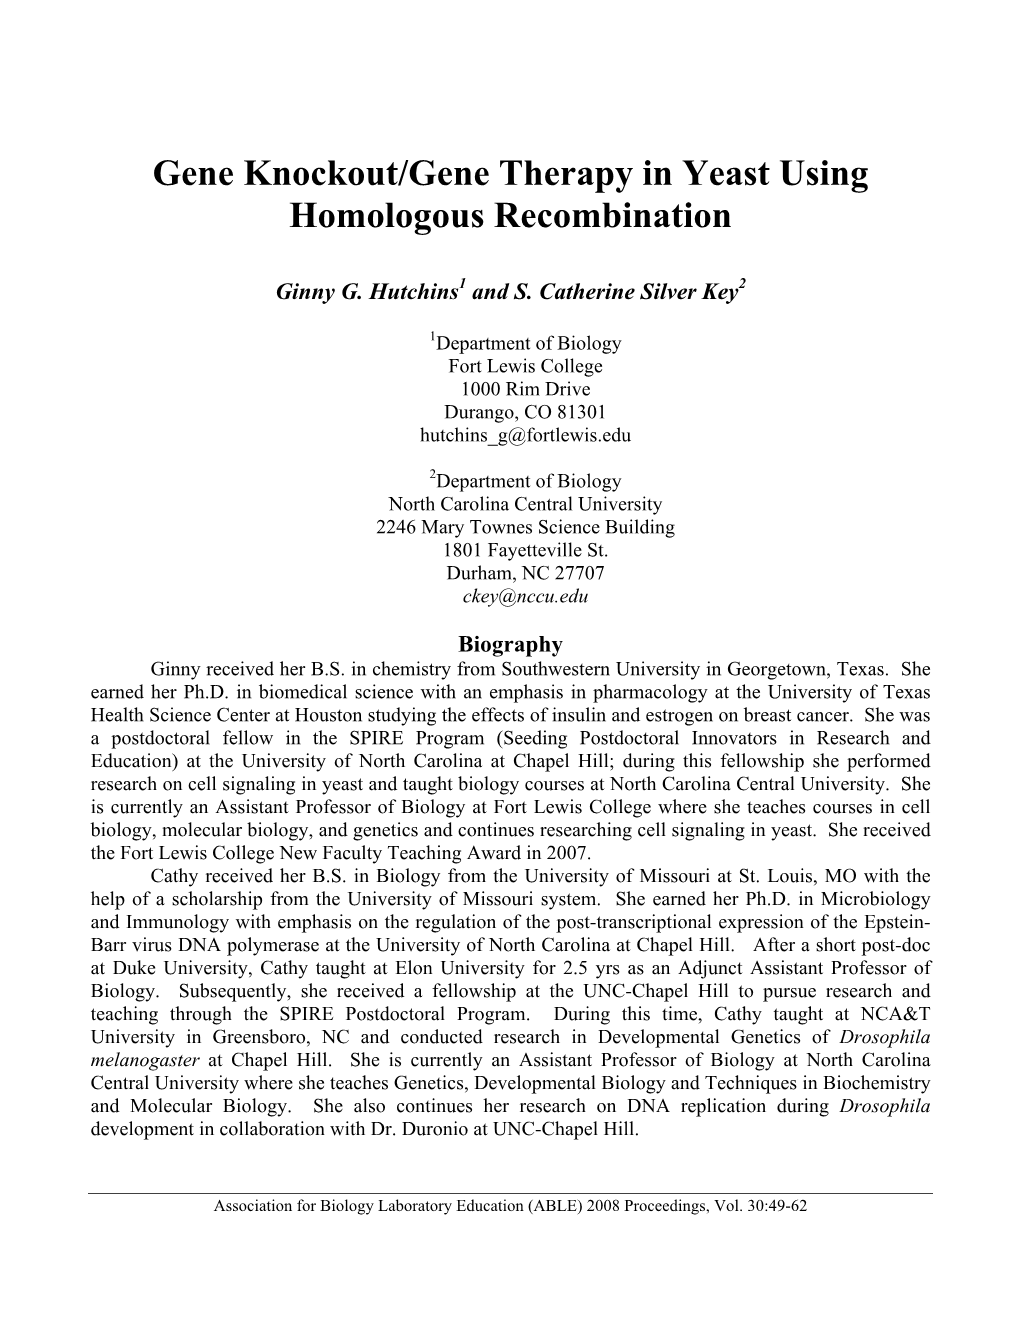 Gene Knockout/Gene Therapy in Yeast Using Homologous Recombination